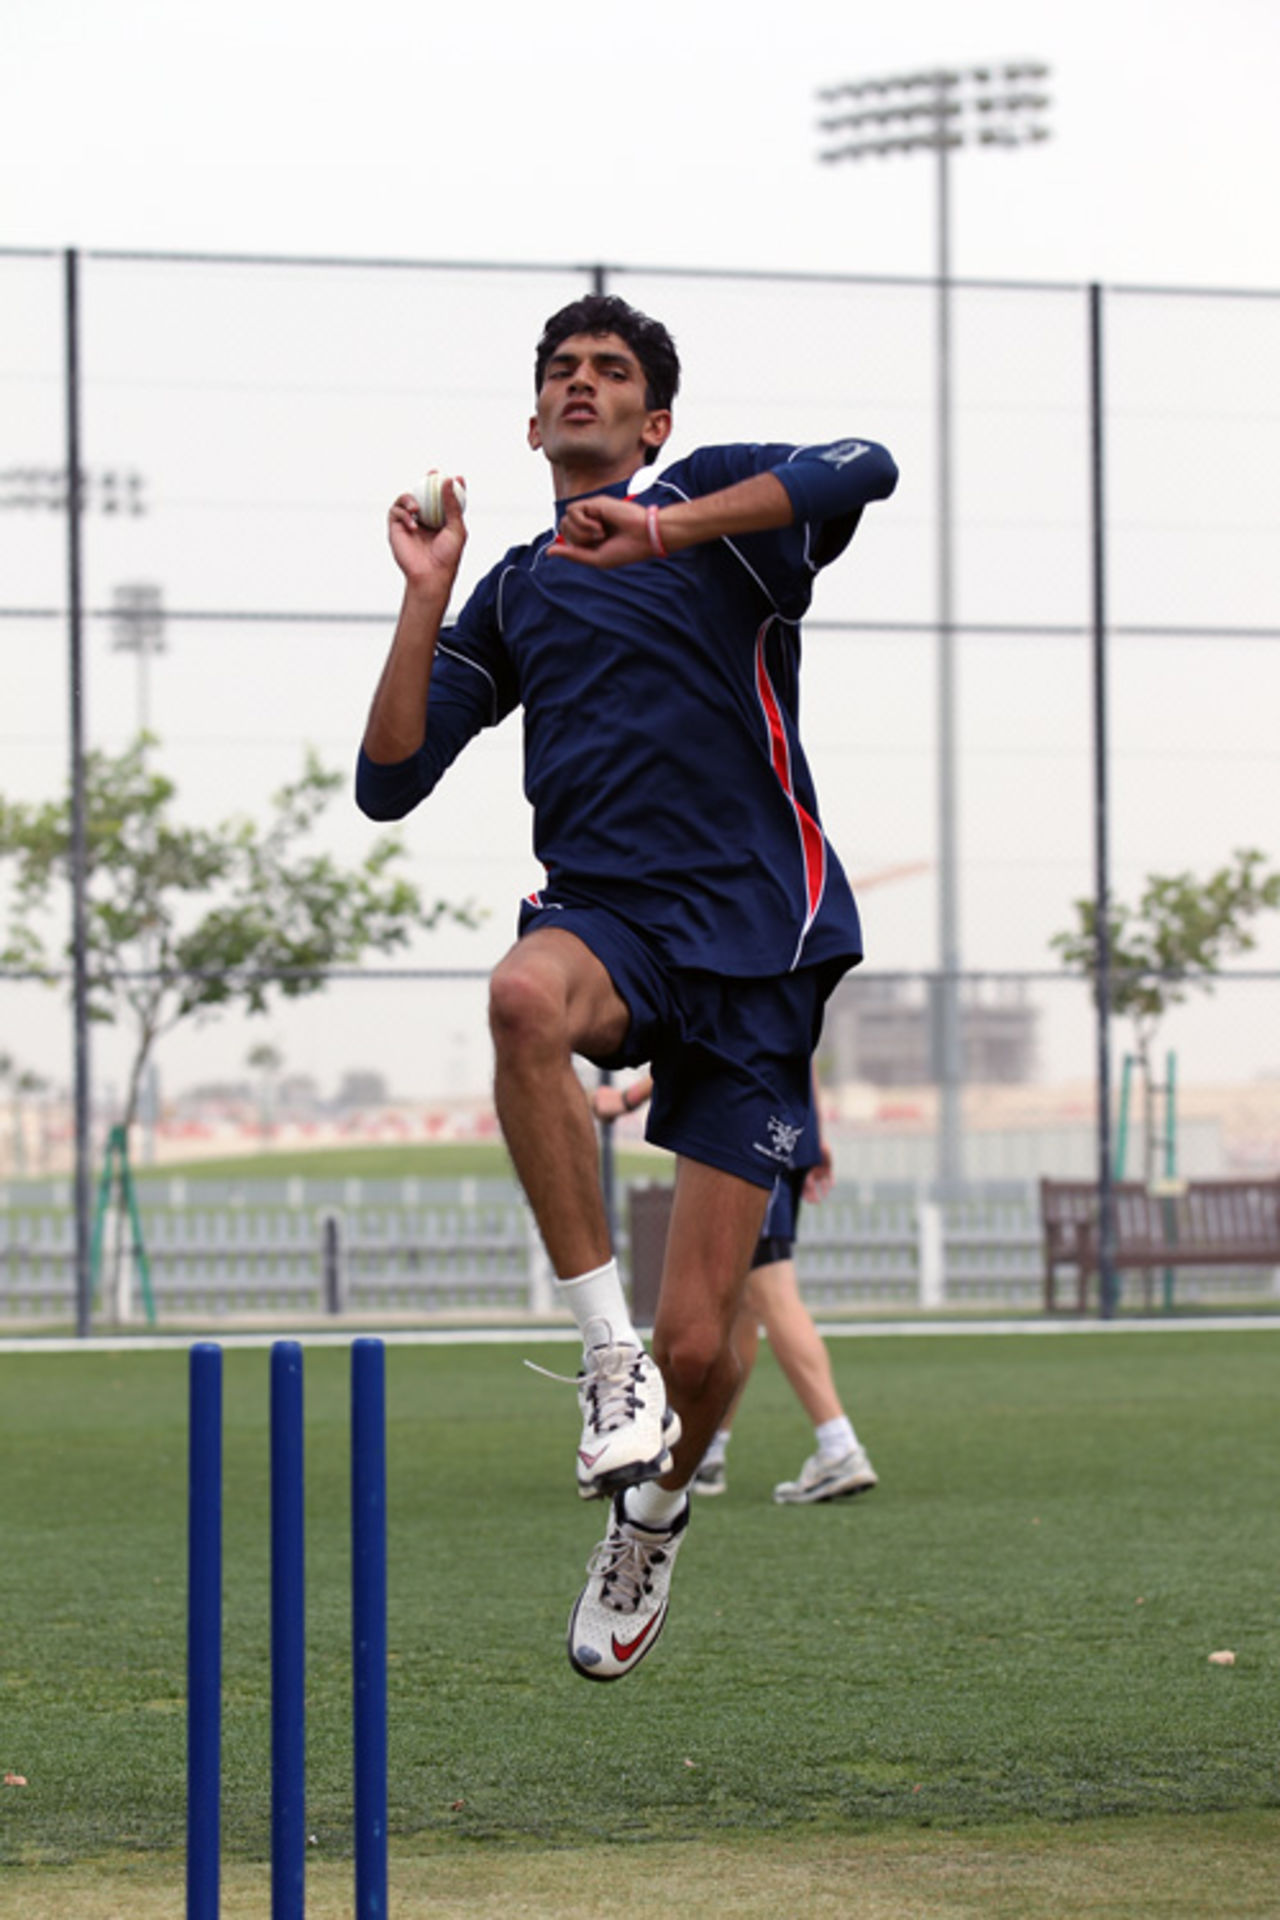 Adil Mehmood bowls during Hong Kong's training session at the ICC Global Cricket Academy in Dubai on 4th April 2011